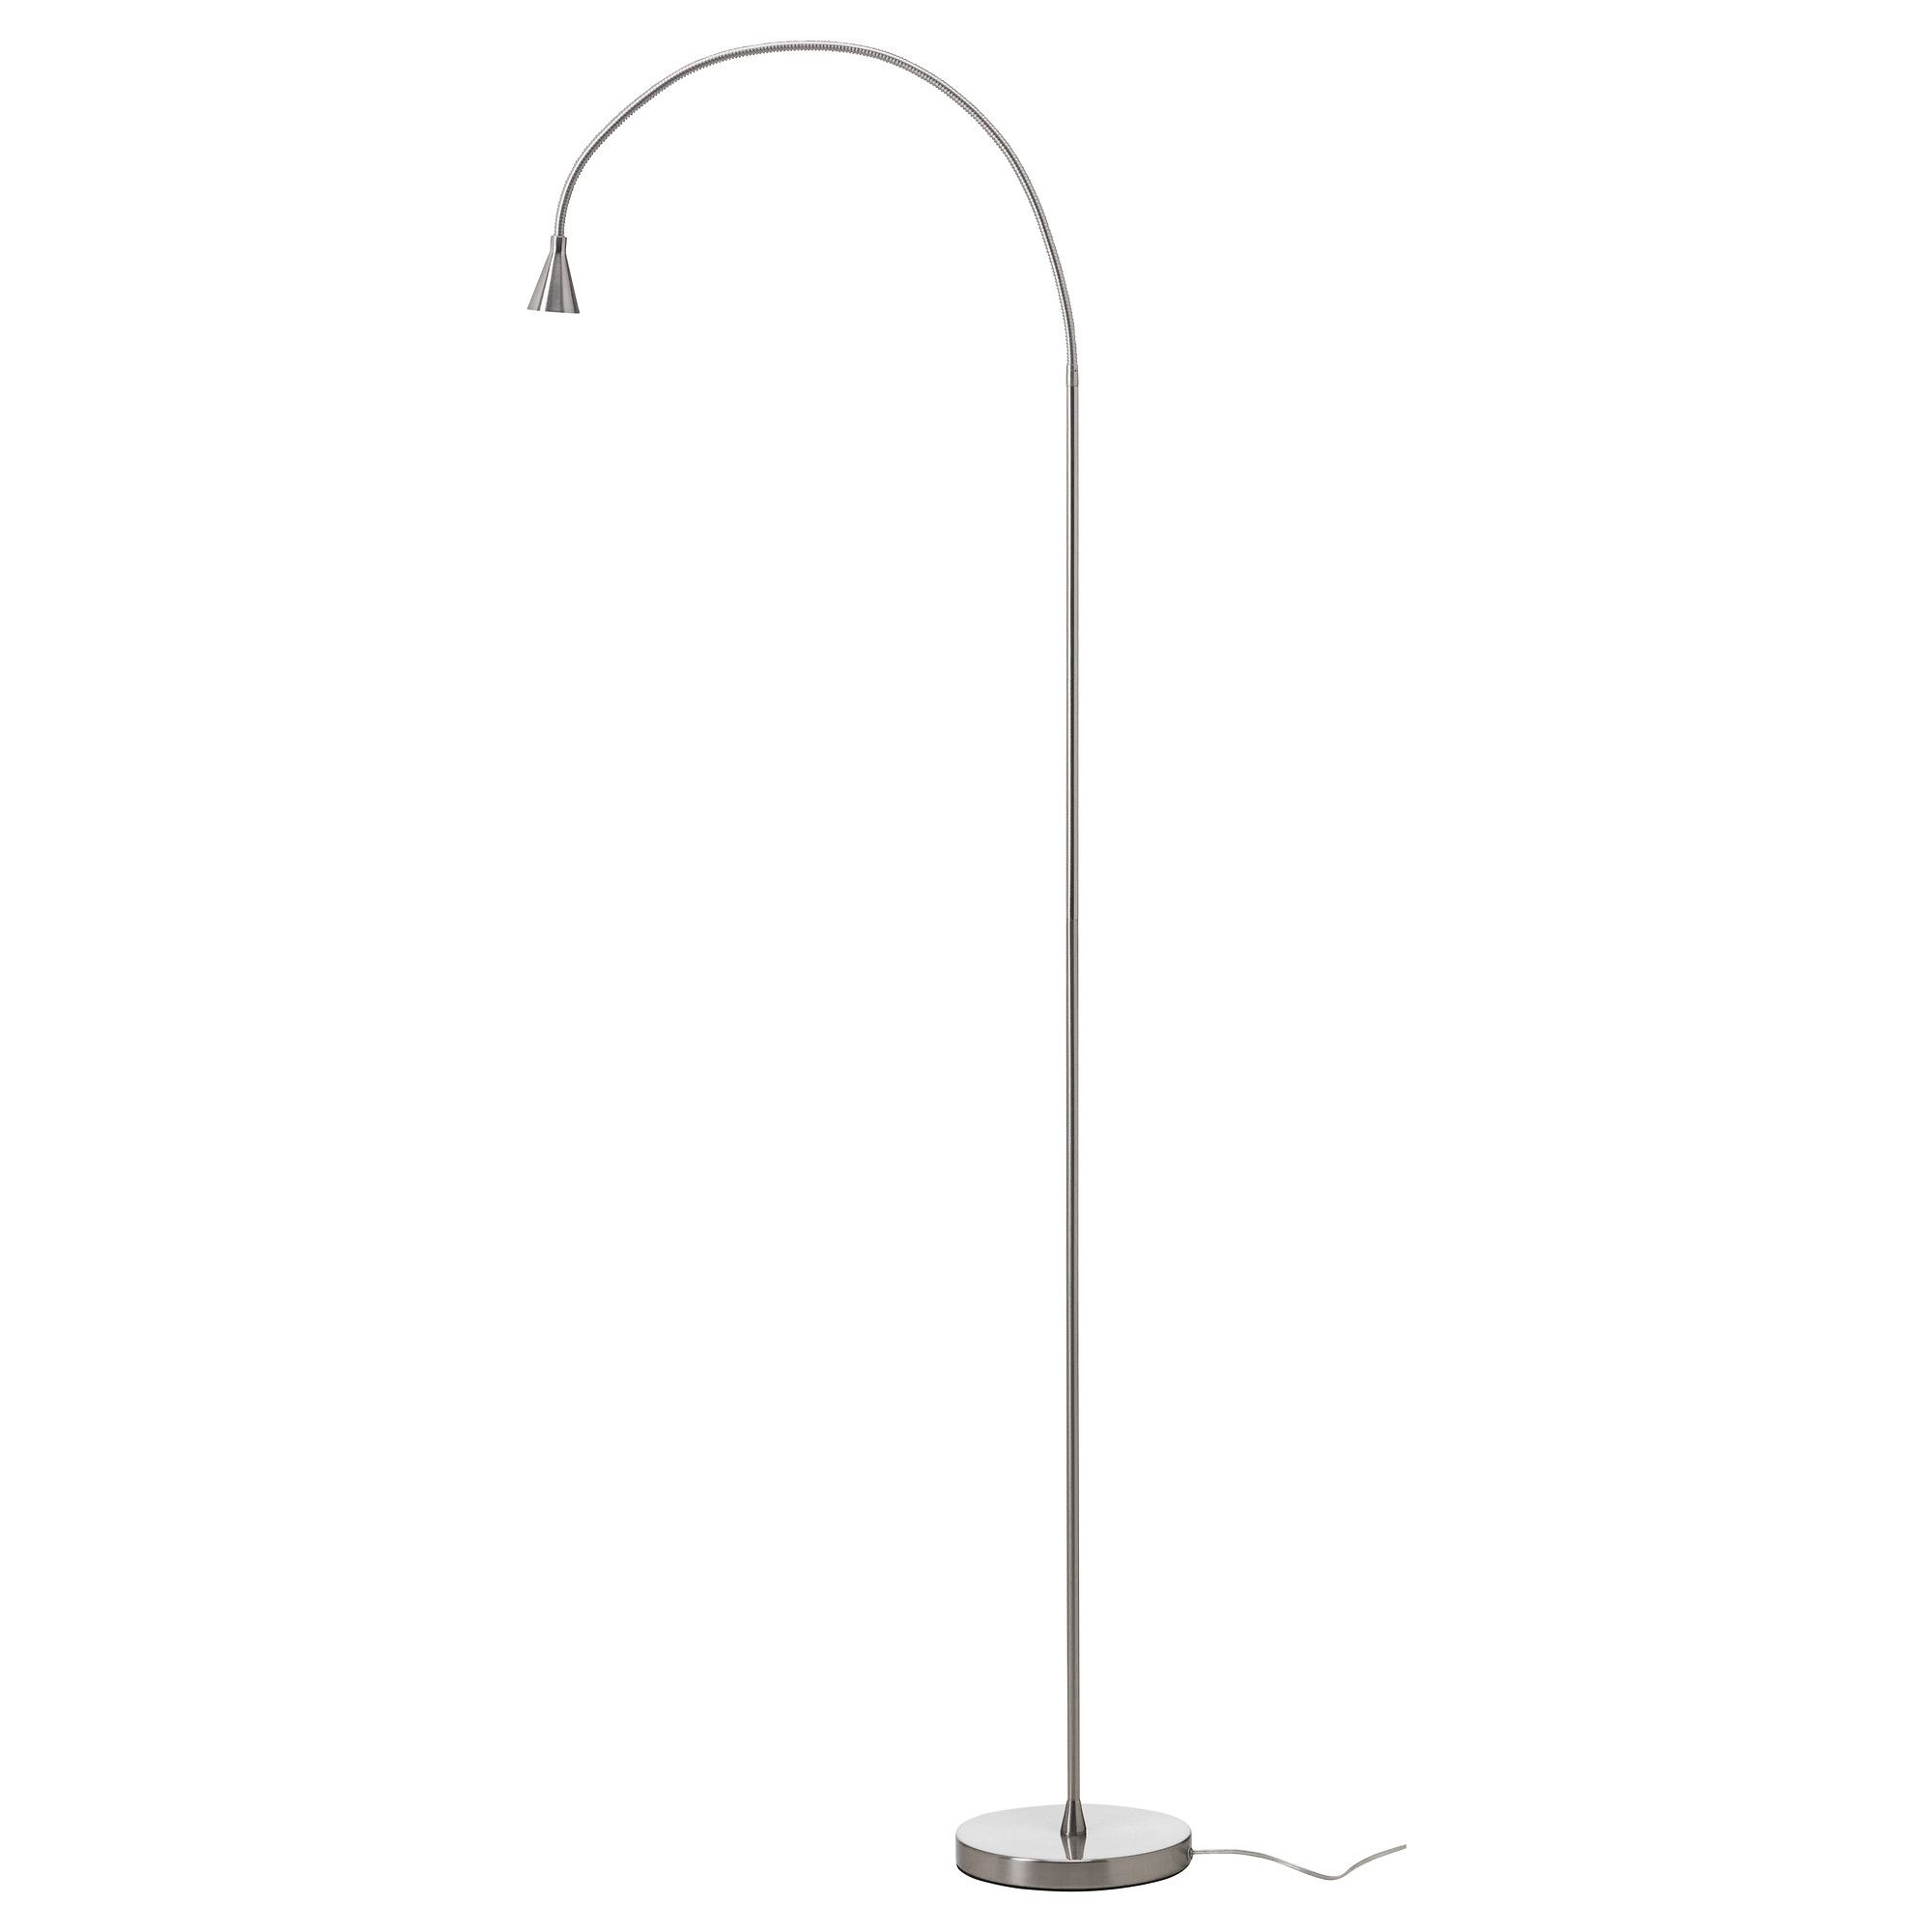 Led Floor Lamps For Reading Gooseneck Floor Lamps Reviews in dimensions 2000 X 2000